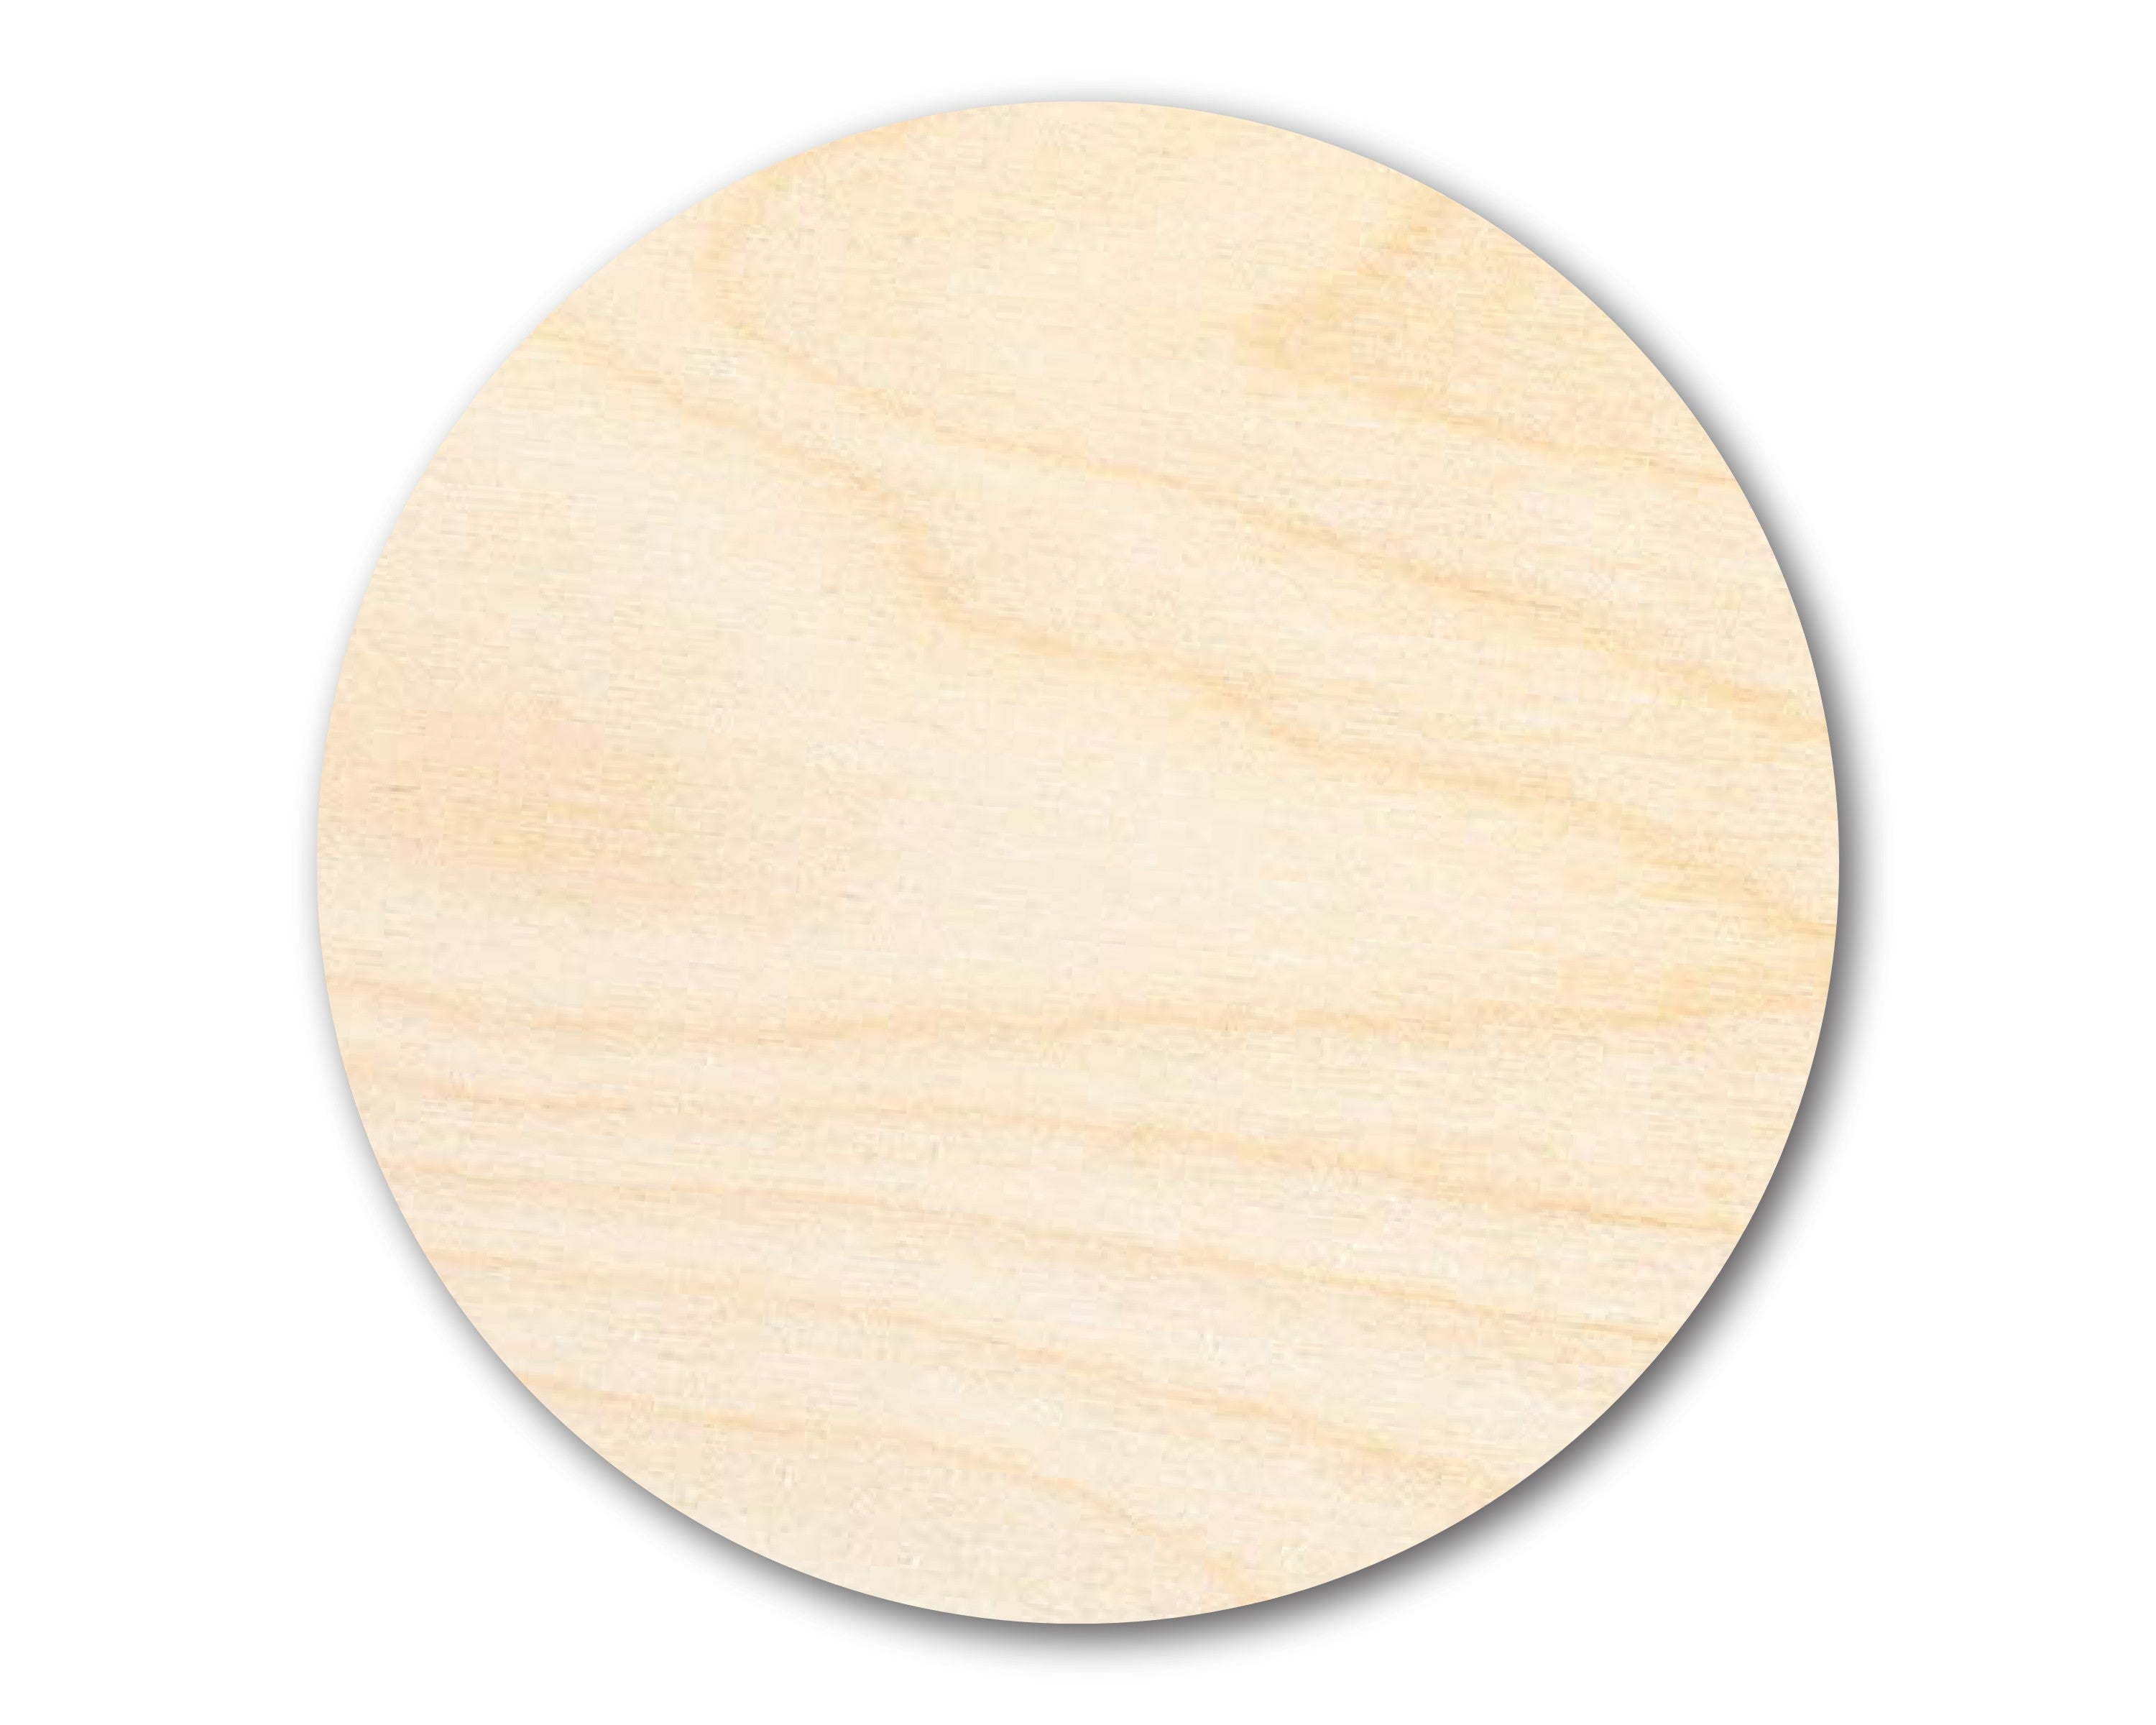 5 Wood Circle Disc Plaques BALTIC BIRCH Wooden -  in 2023